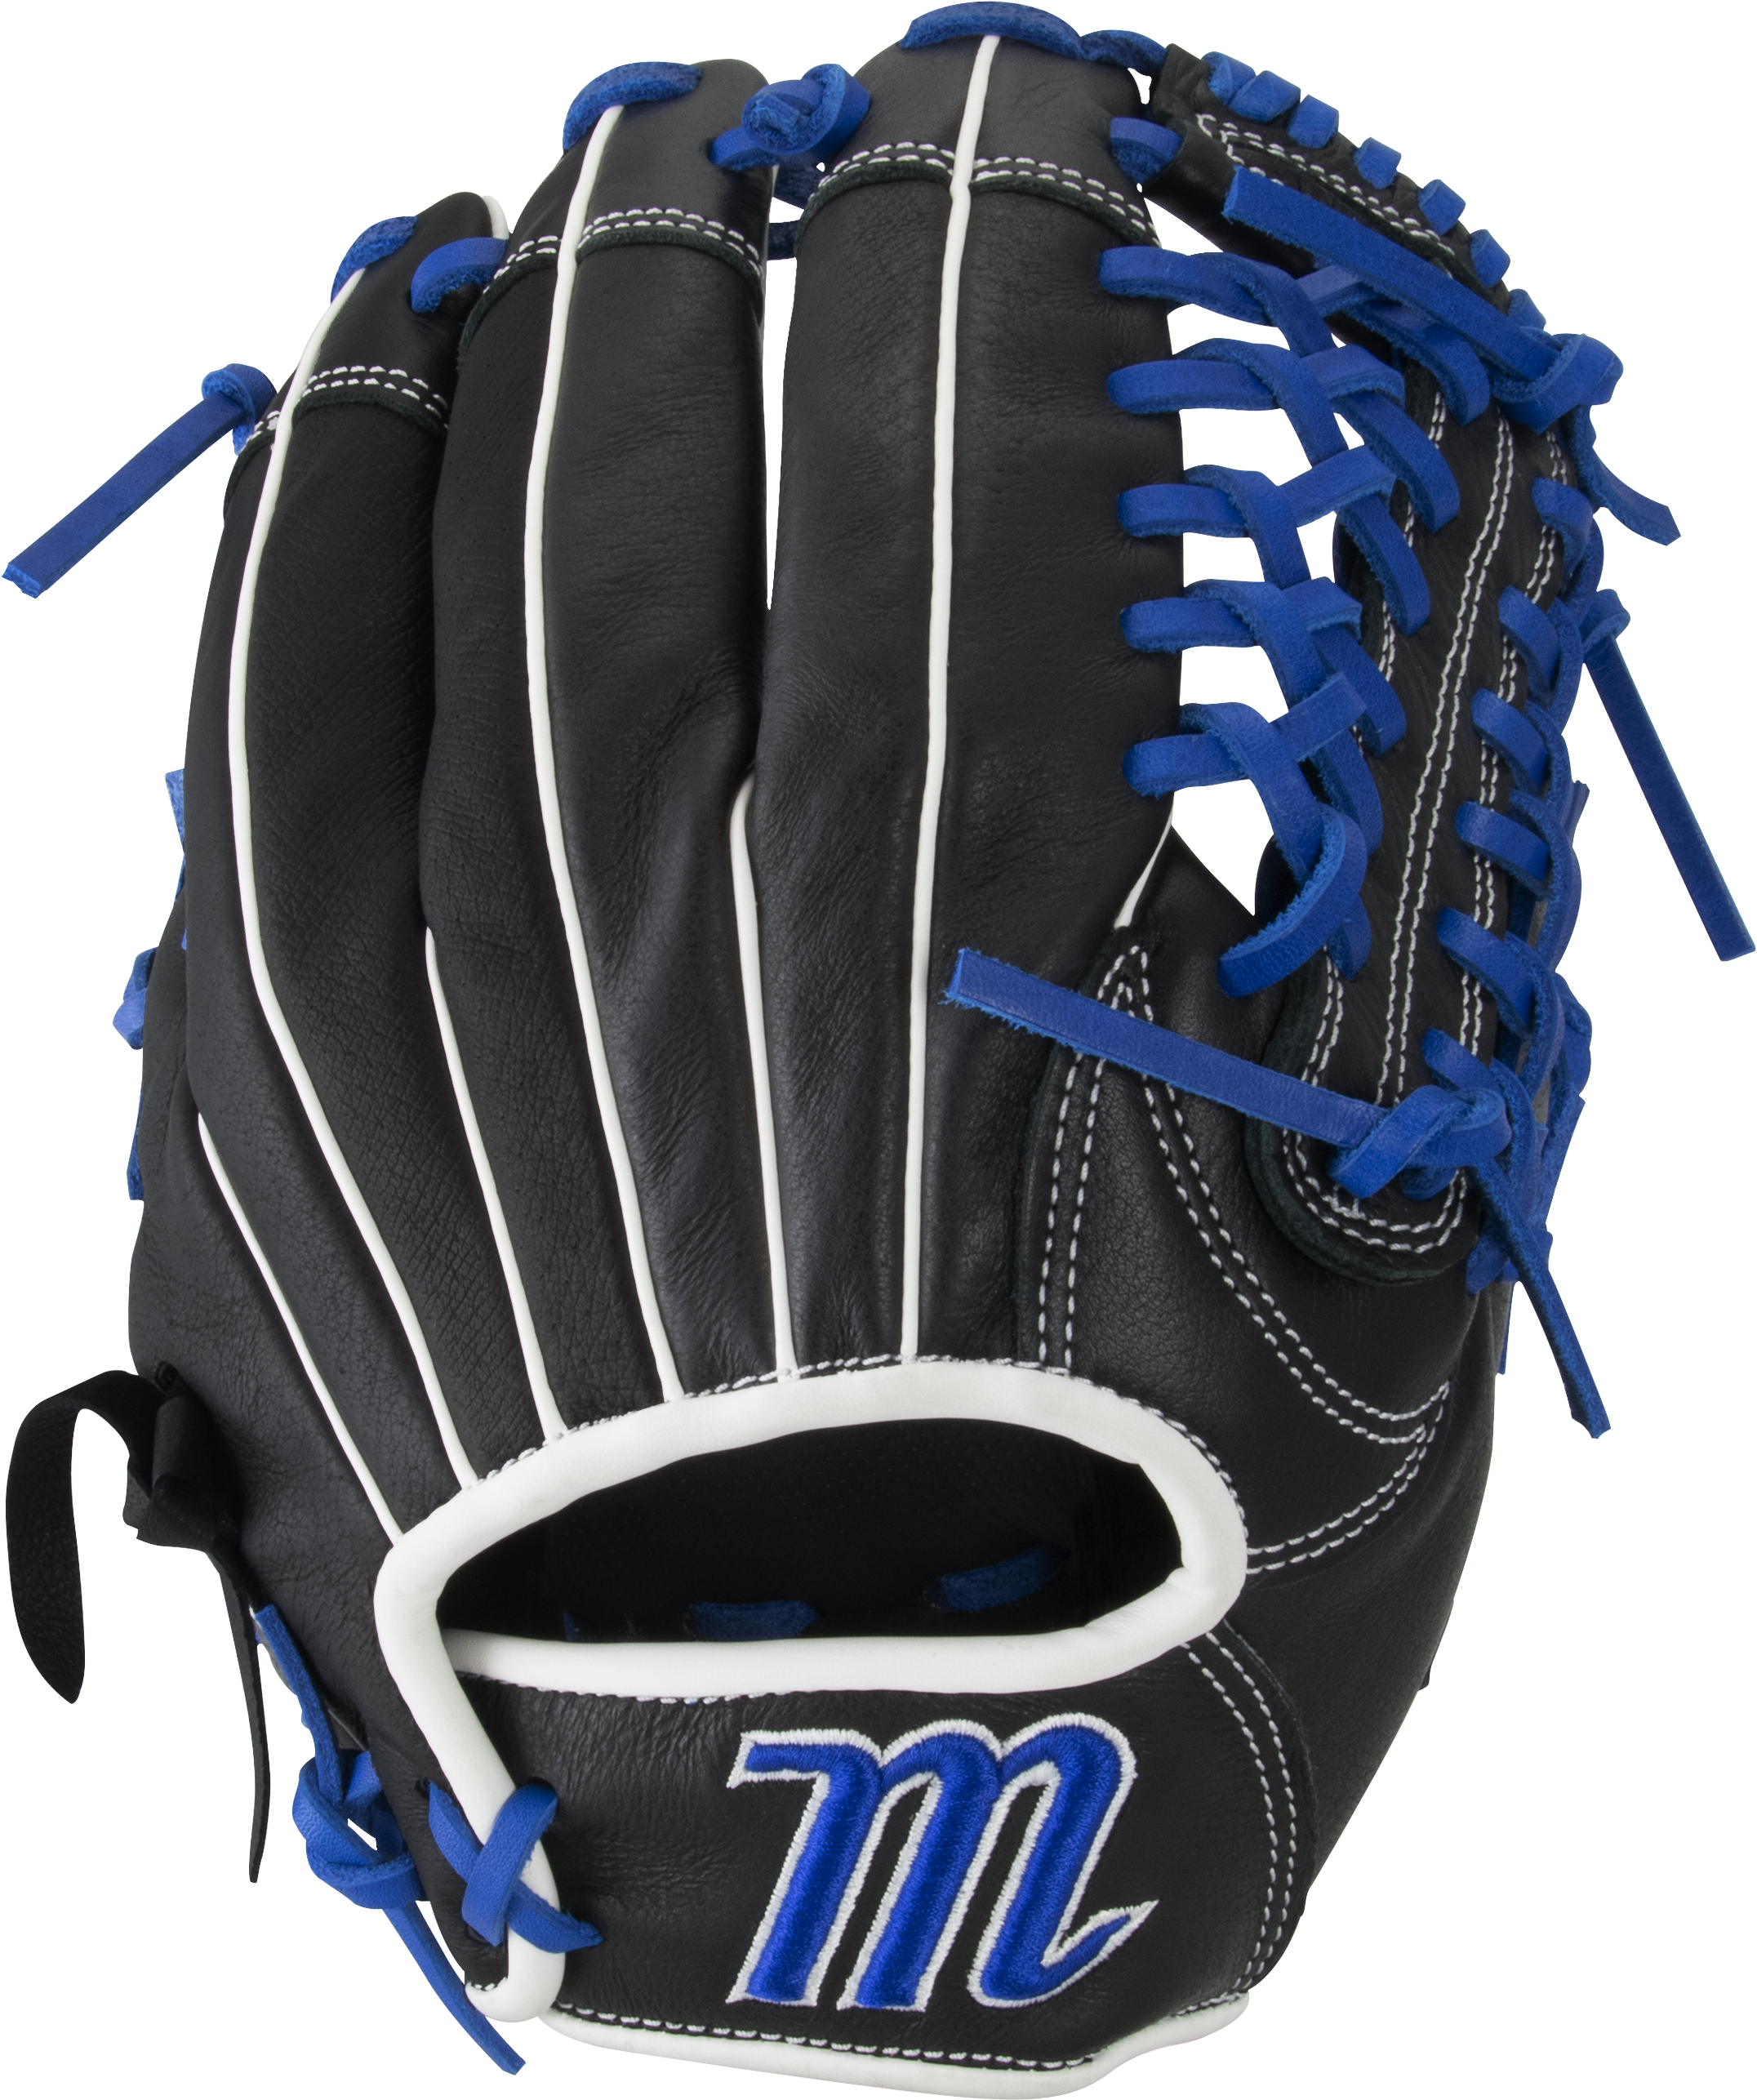 marucci-acadia-youth-baseball-glove-ac1175y-11-75-trap-web-right-hand-throw MFGAC1175Y-BKRB-RightHandThrow Marucci 849817099742 Full leather shell provides strength while padded palm lining reduces weight